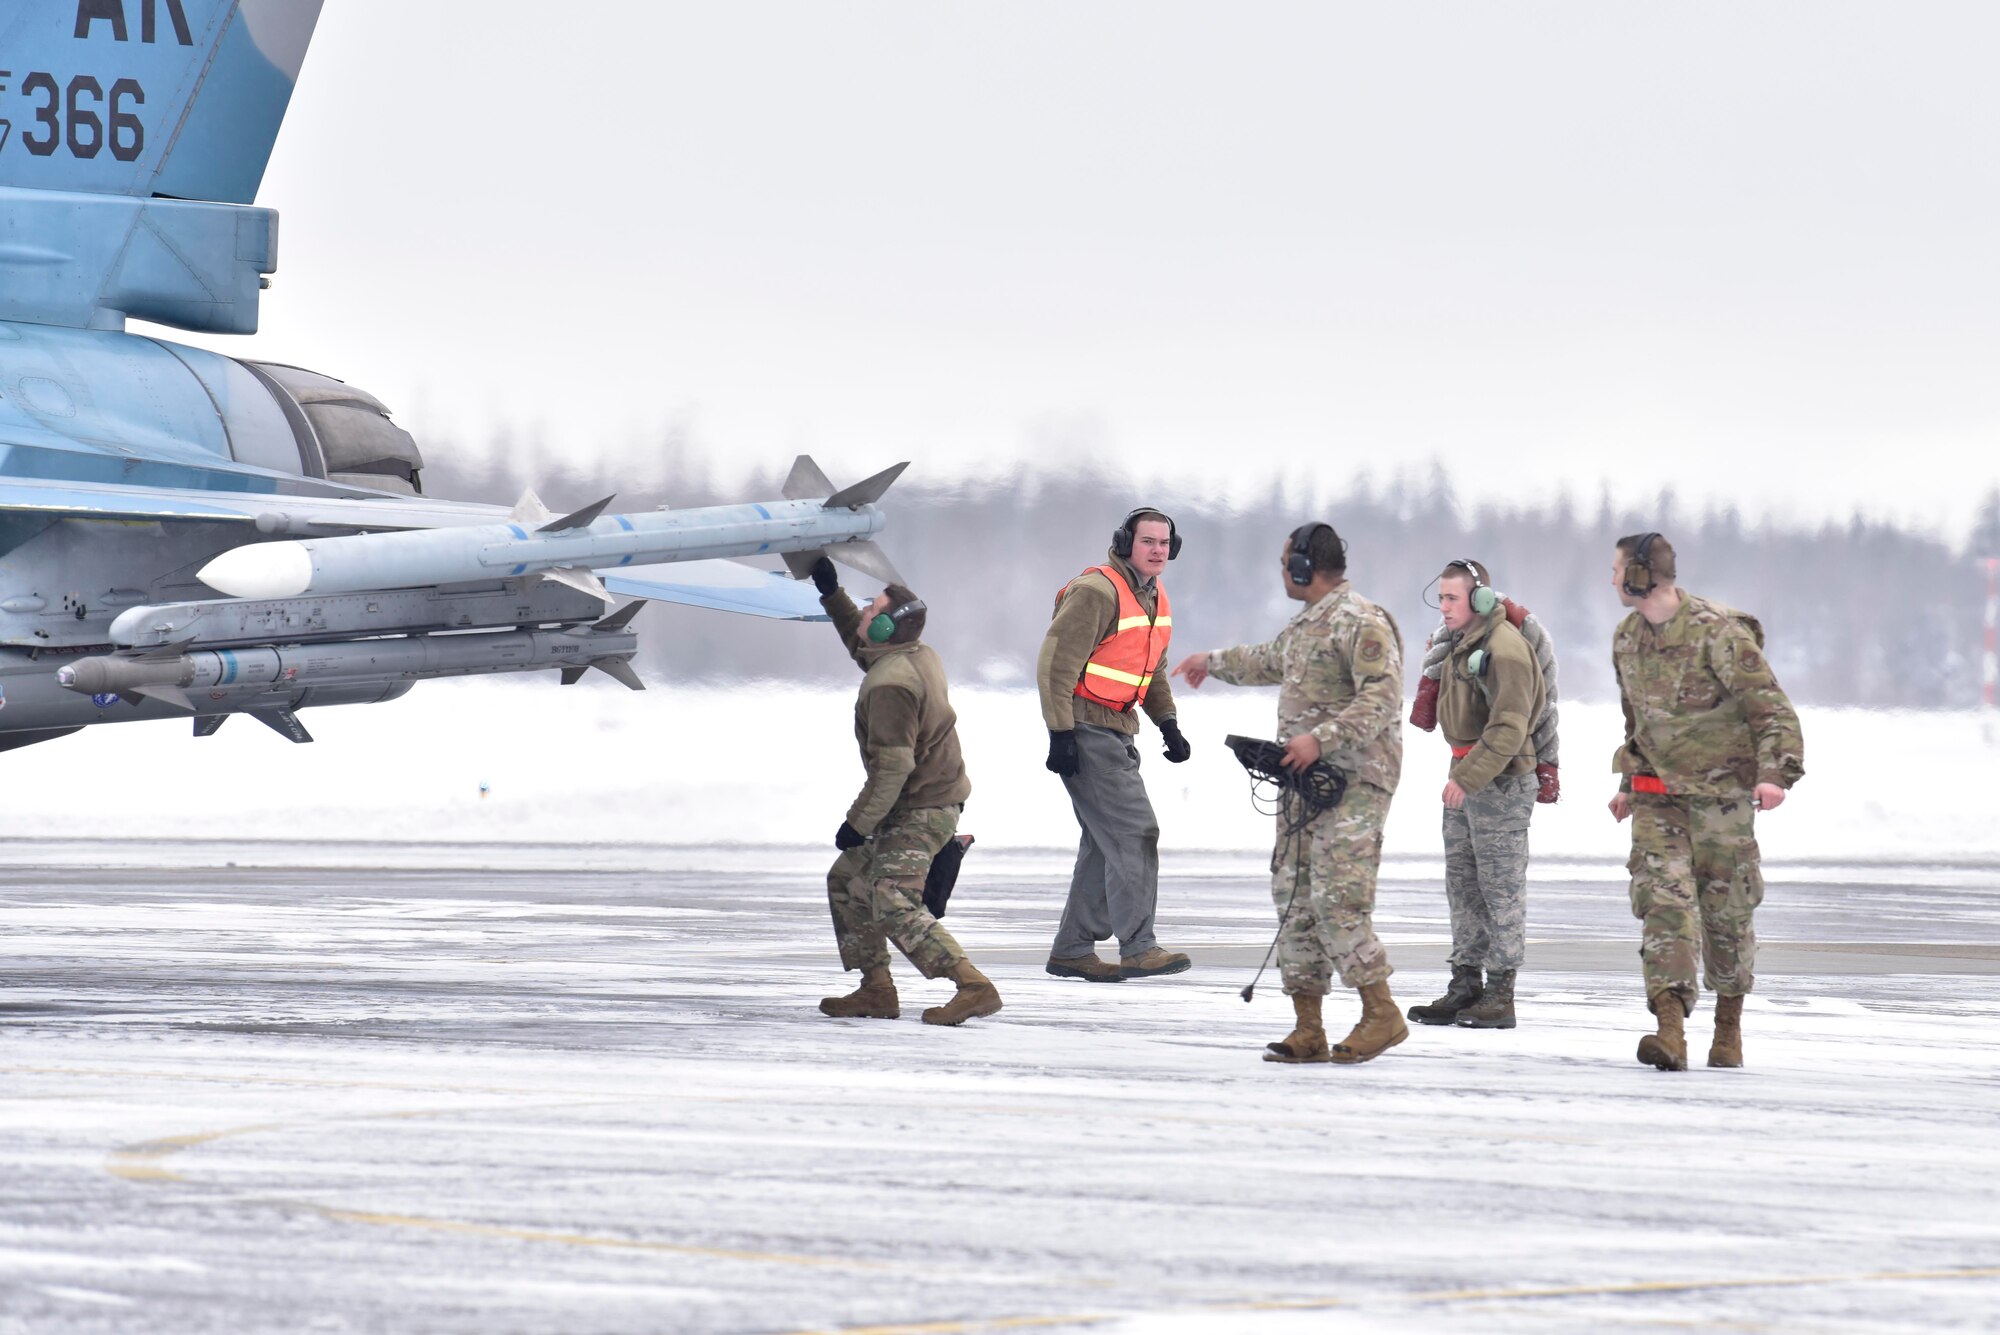 Airmen assigned to the 354th Aircraft Maintenance Squadron conduct pre-flight checks on an F-16 Fighting Falcon from the 18th Aggressor Squadron at Eielson Air Force Base, Alaska, March 24, 2020. Air Force maintainers inspect every part of the aircraft to ensure the pilot is safe and able to carry out the mission. (U.S. Air Force photo by Senior Airman Beaux Hebert)